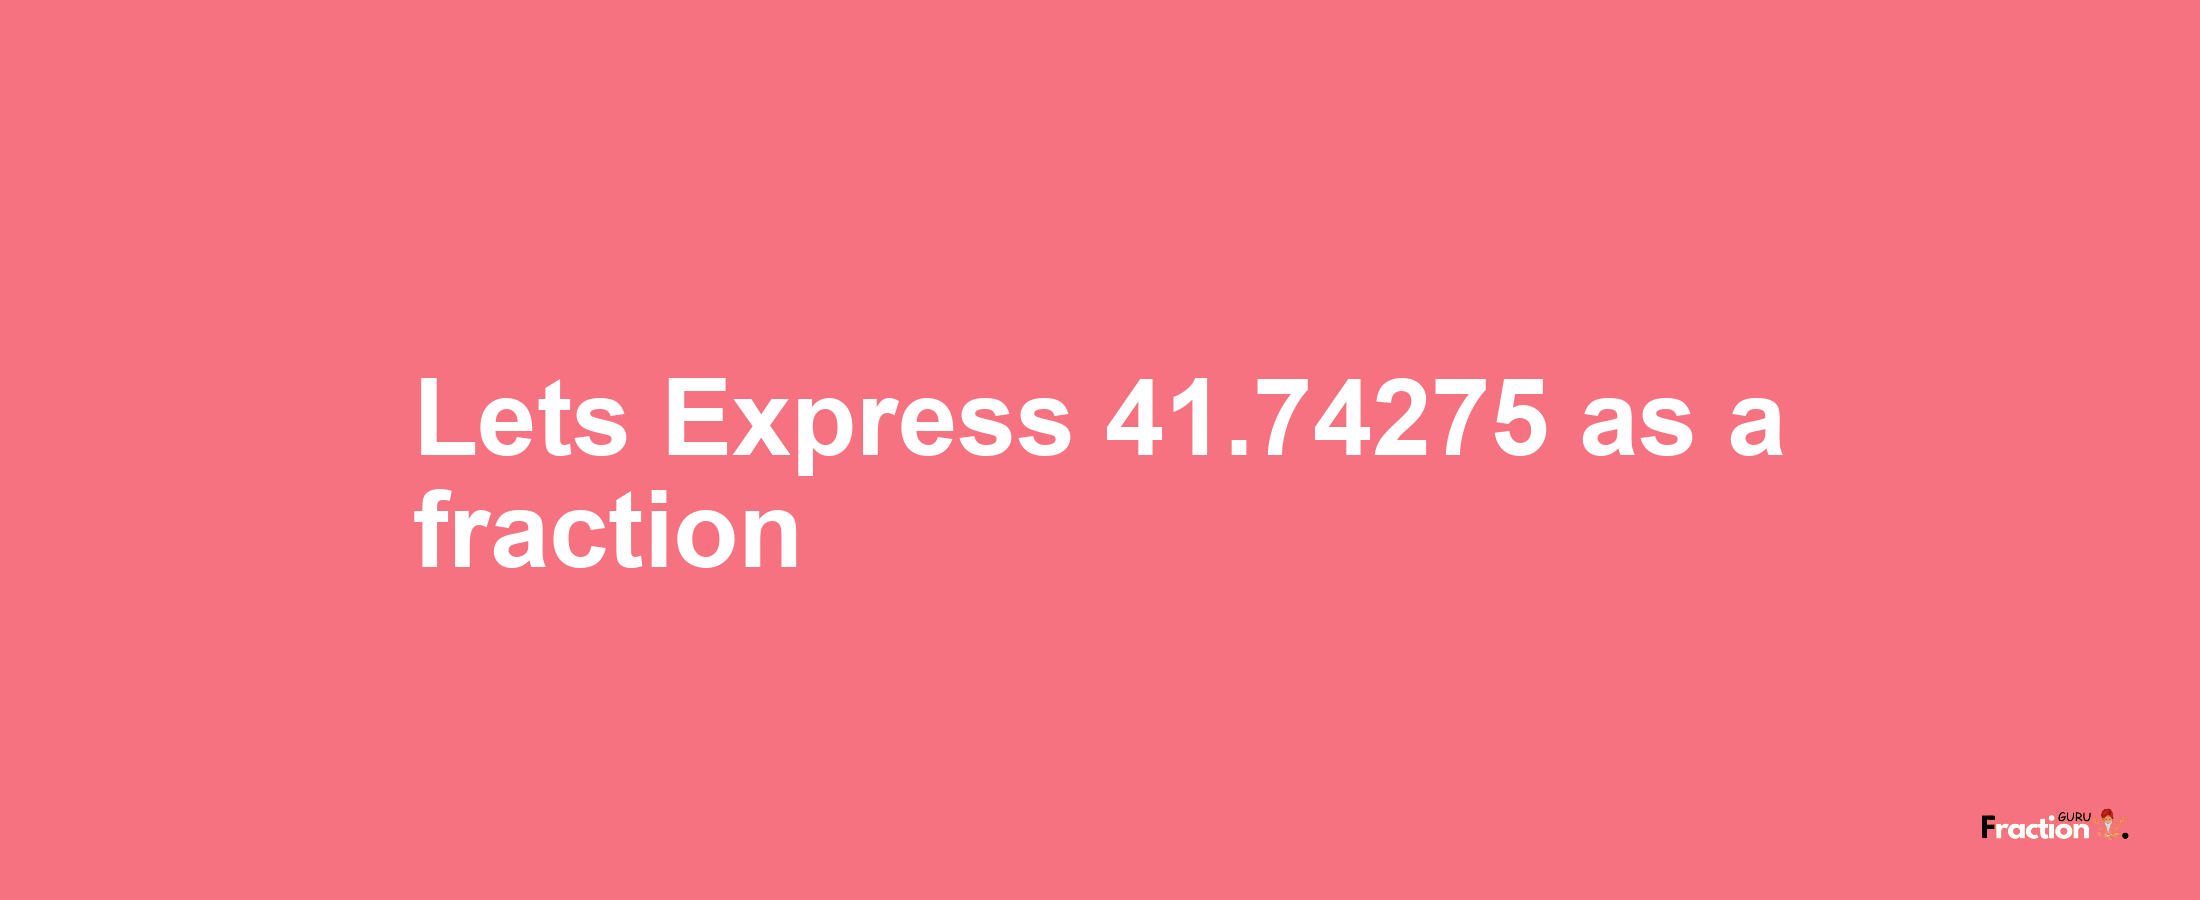 Lets Express 41.74275 as afraction